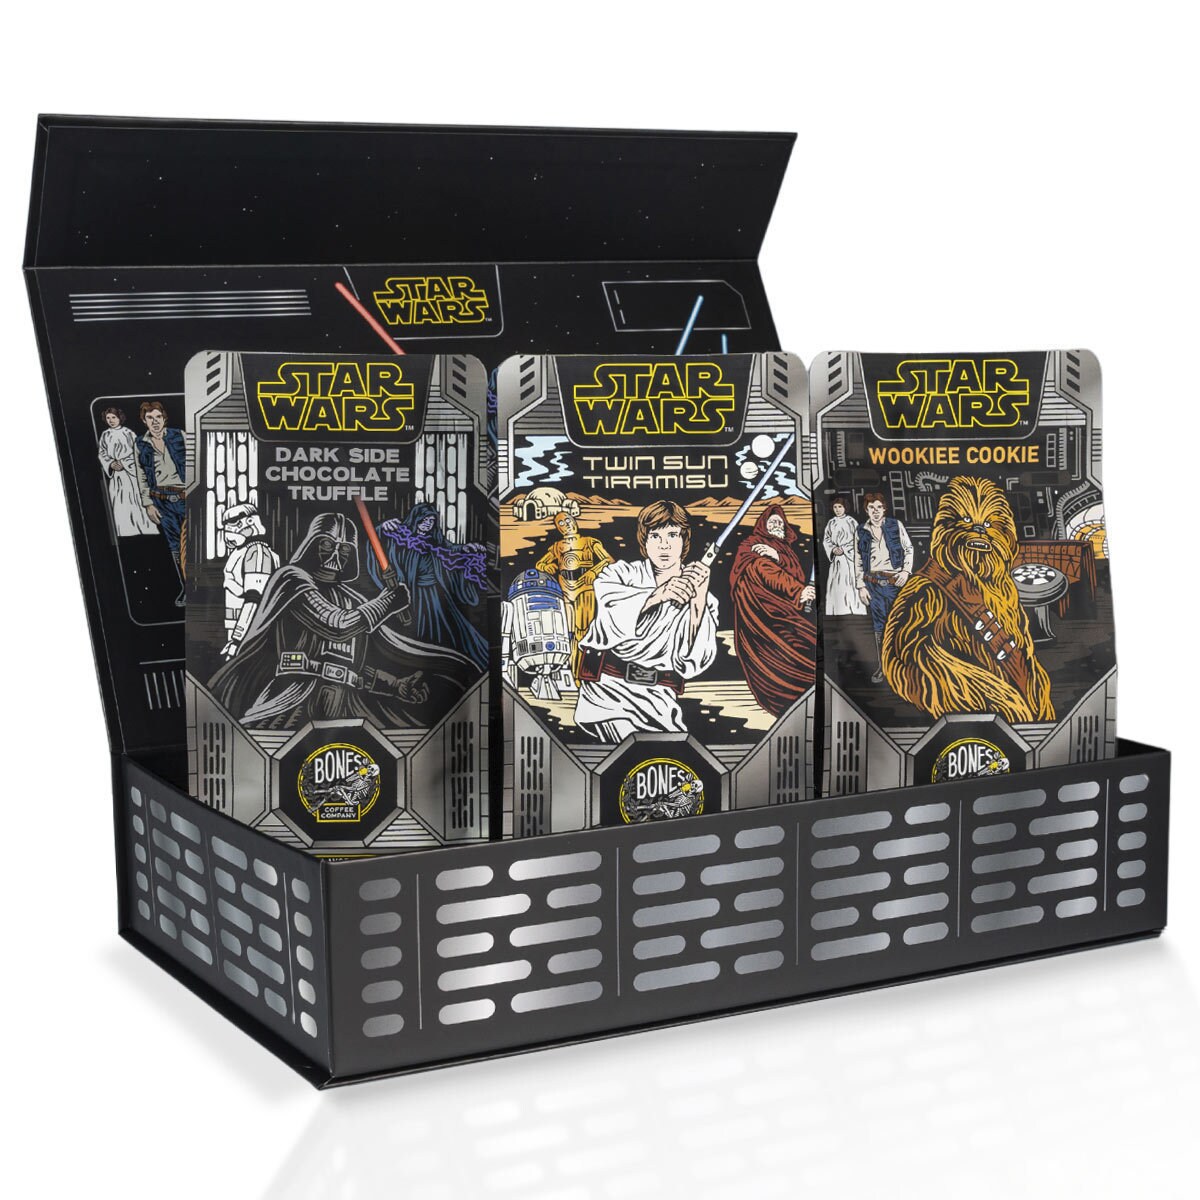 Star Wars Collector’s Box by Bones Coffee